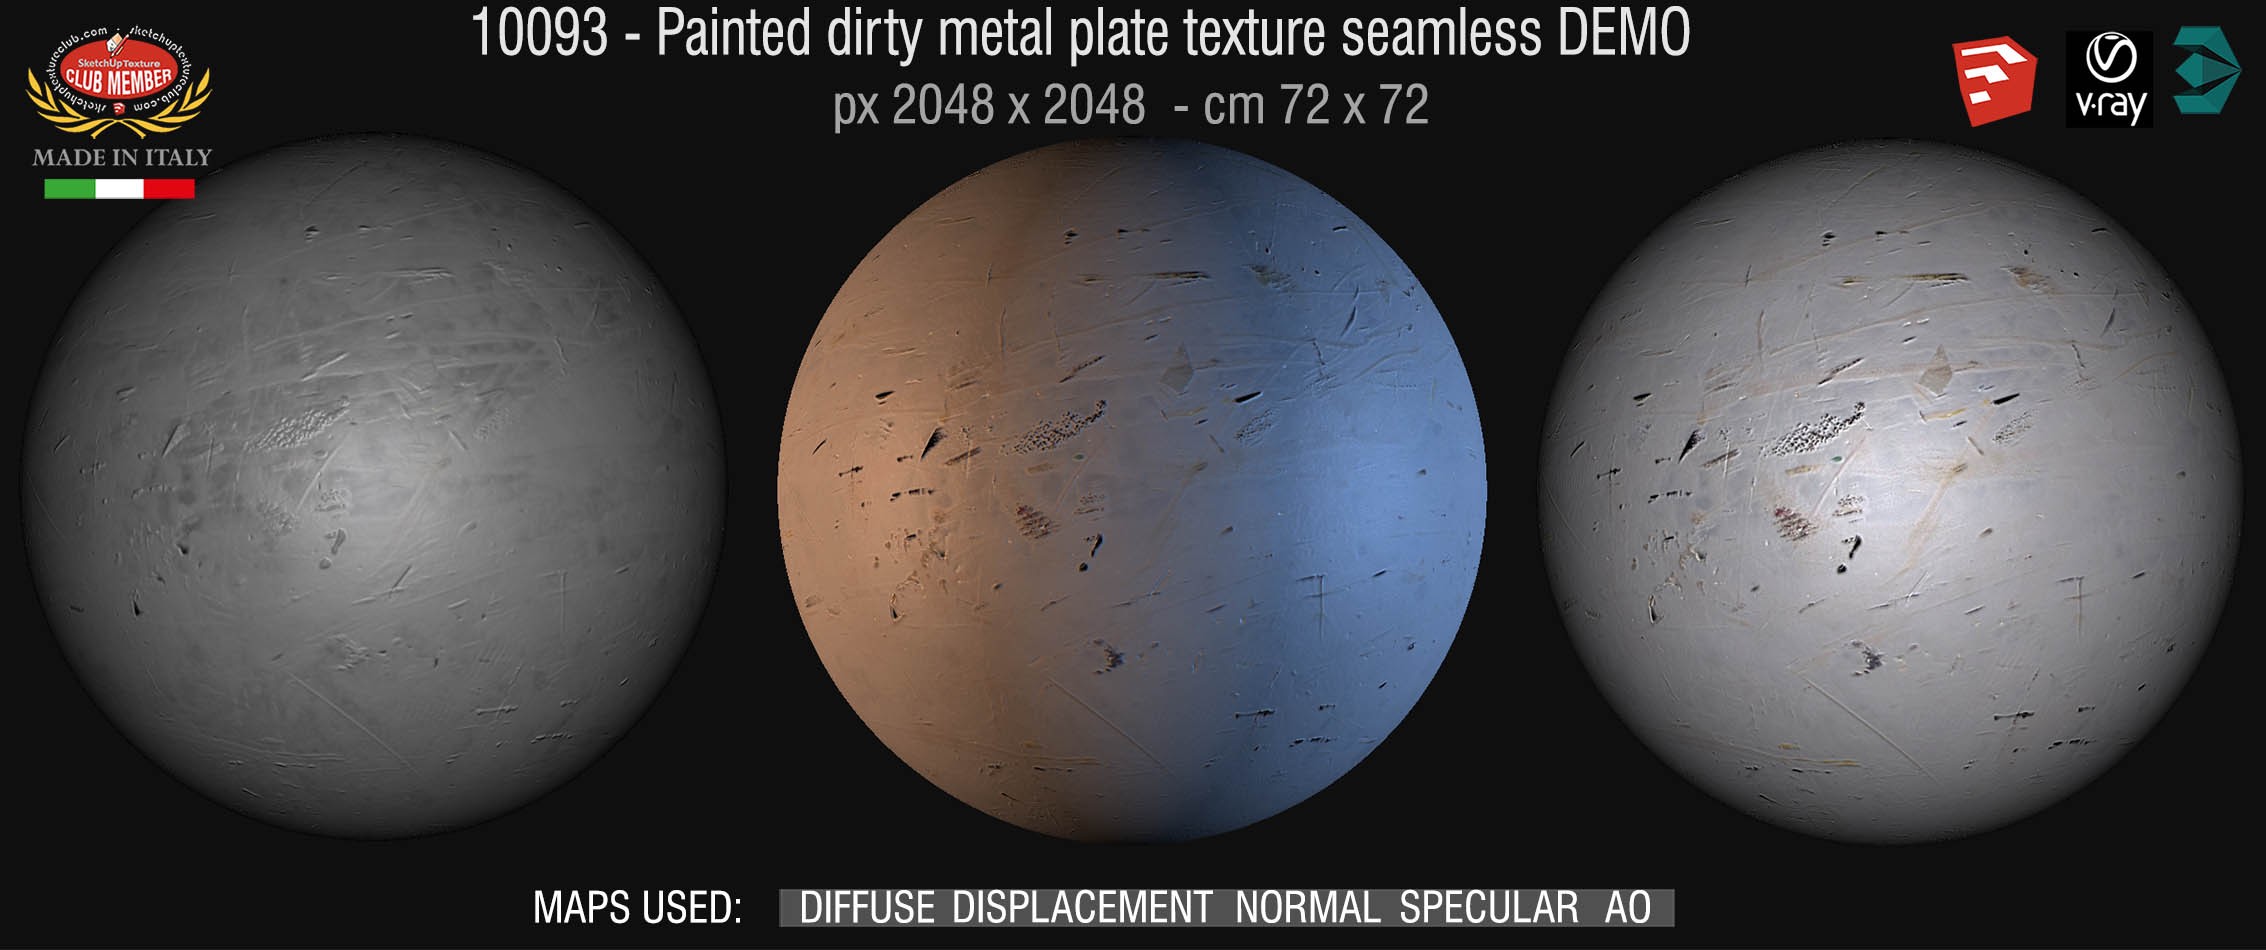 10093 HR Painted dirty metal texture seamless + maps DEMO